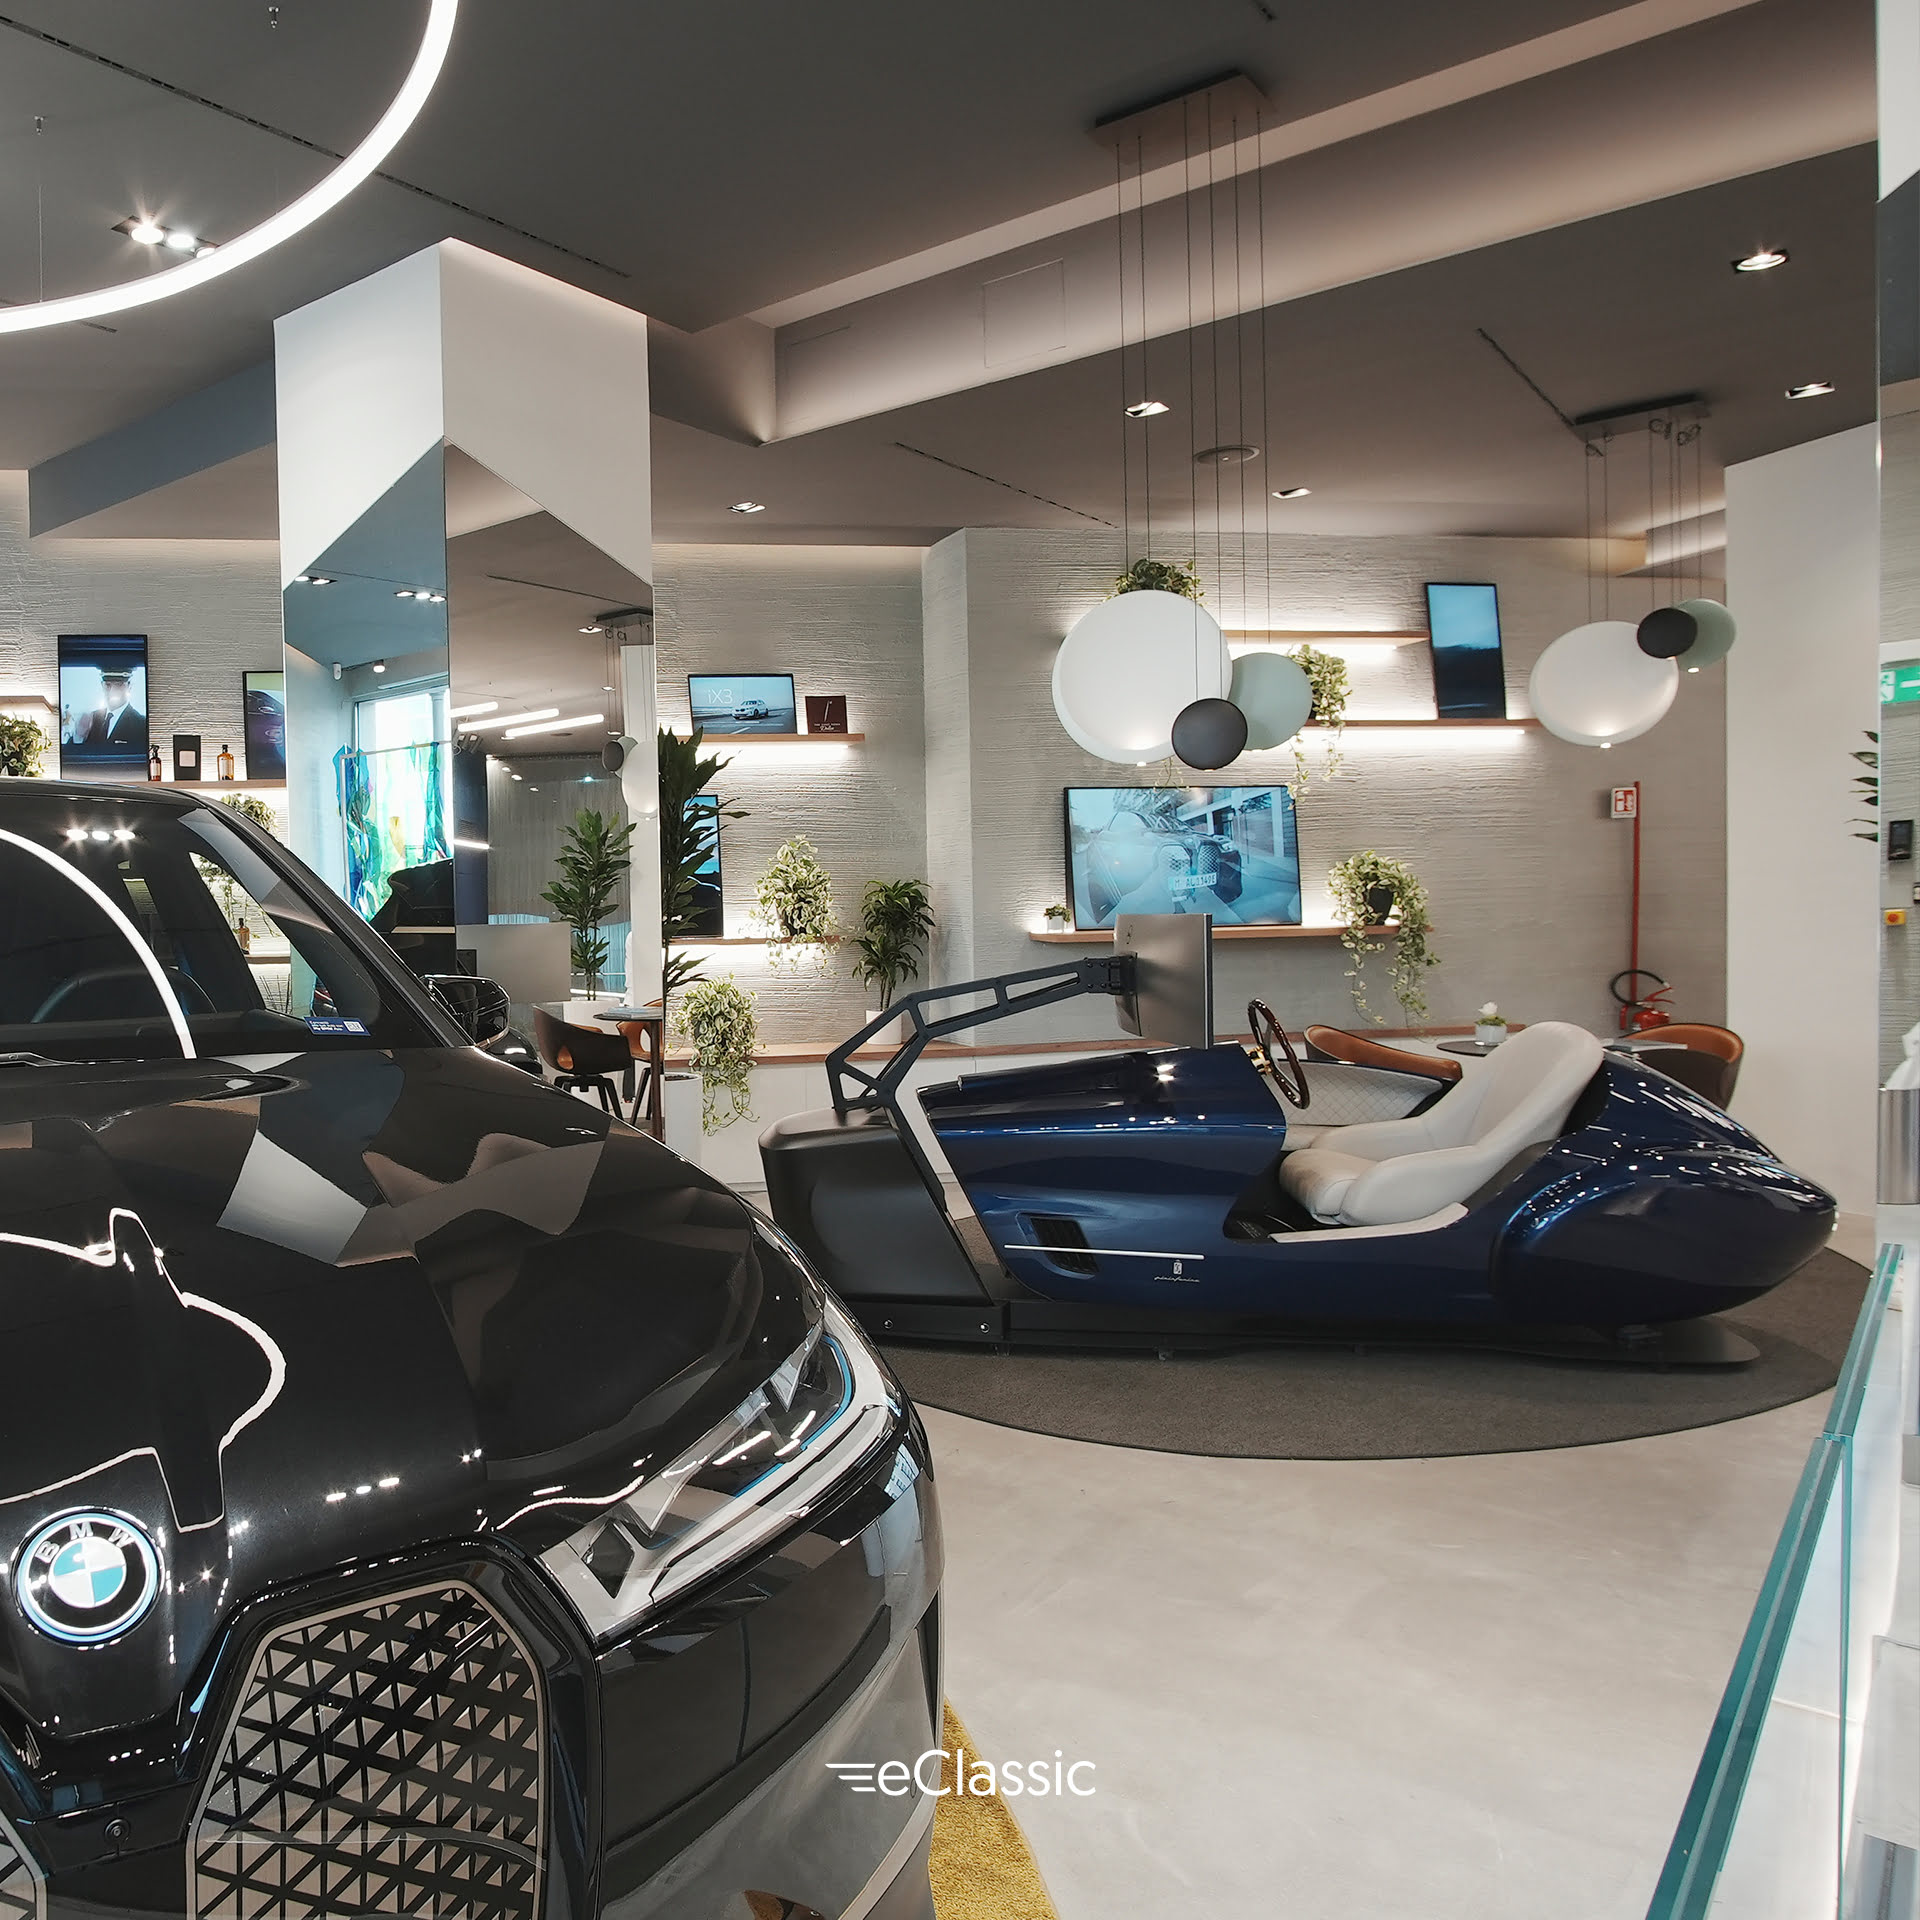 eClassic in the revolutionary BMW Roma Urban Store image